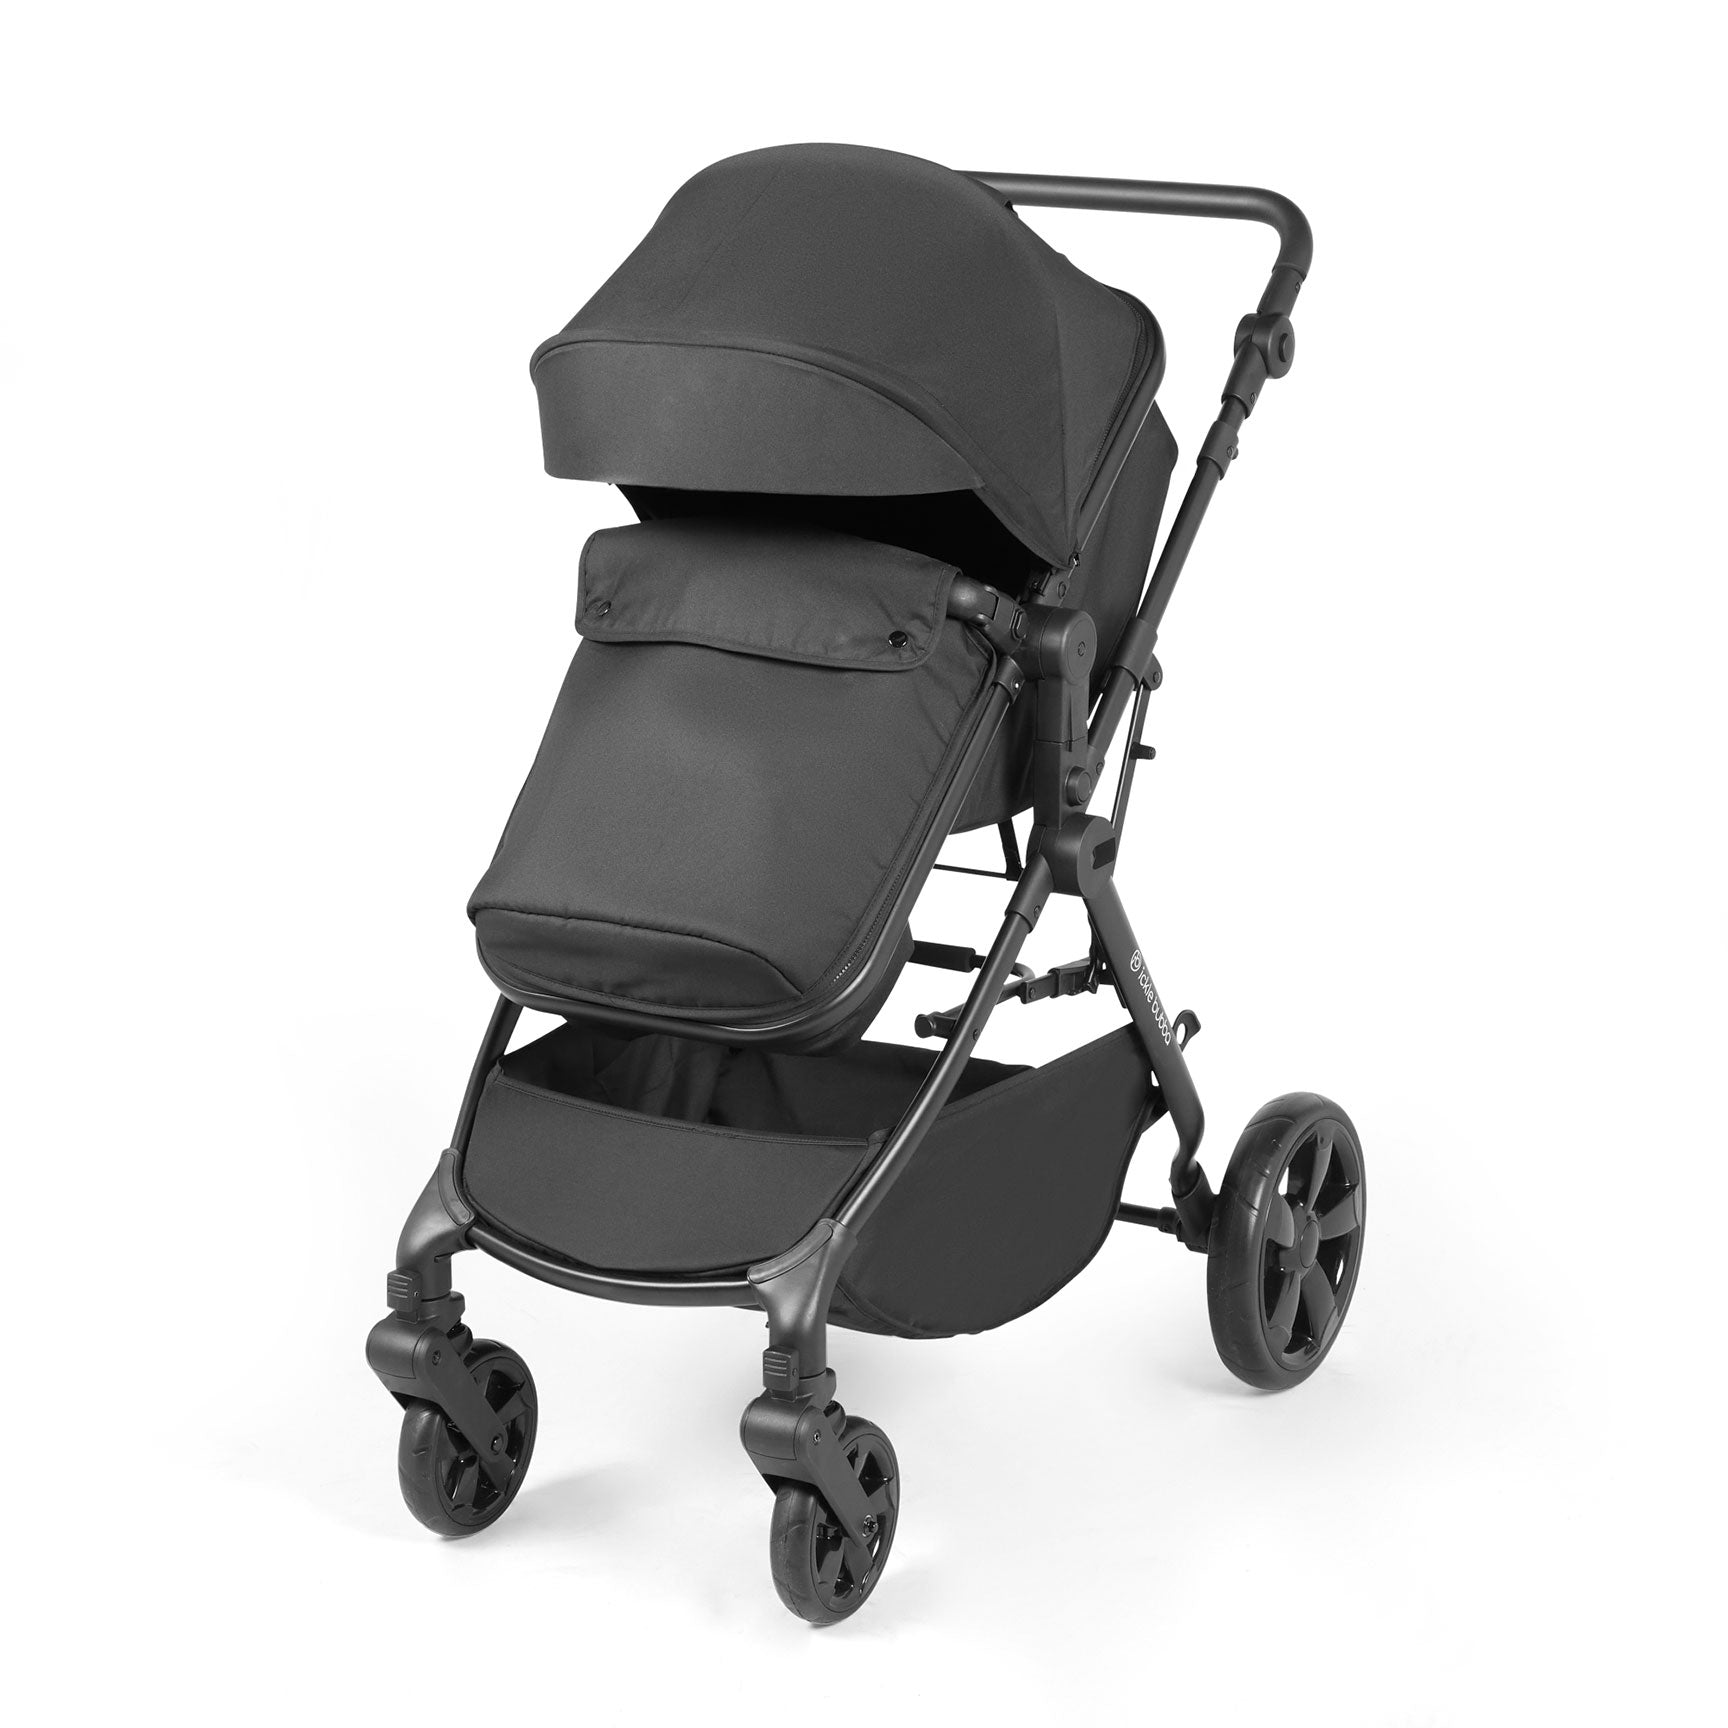 Ickle Bubba Comet 3-in-1 Travel System with Astral Car Seat in Black Baby Prams 10-008-101-002 5056515025750